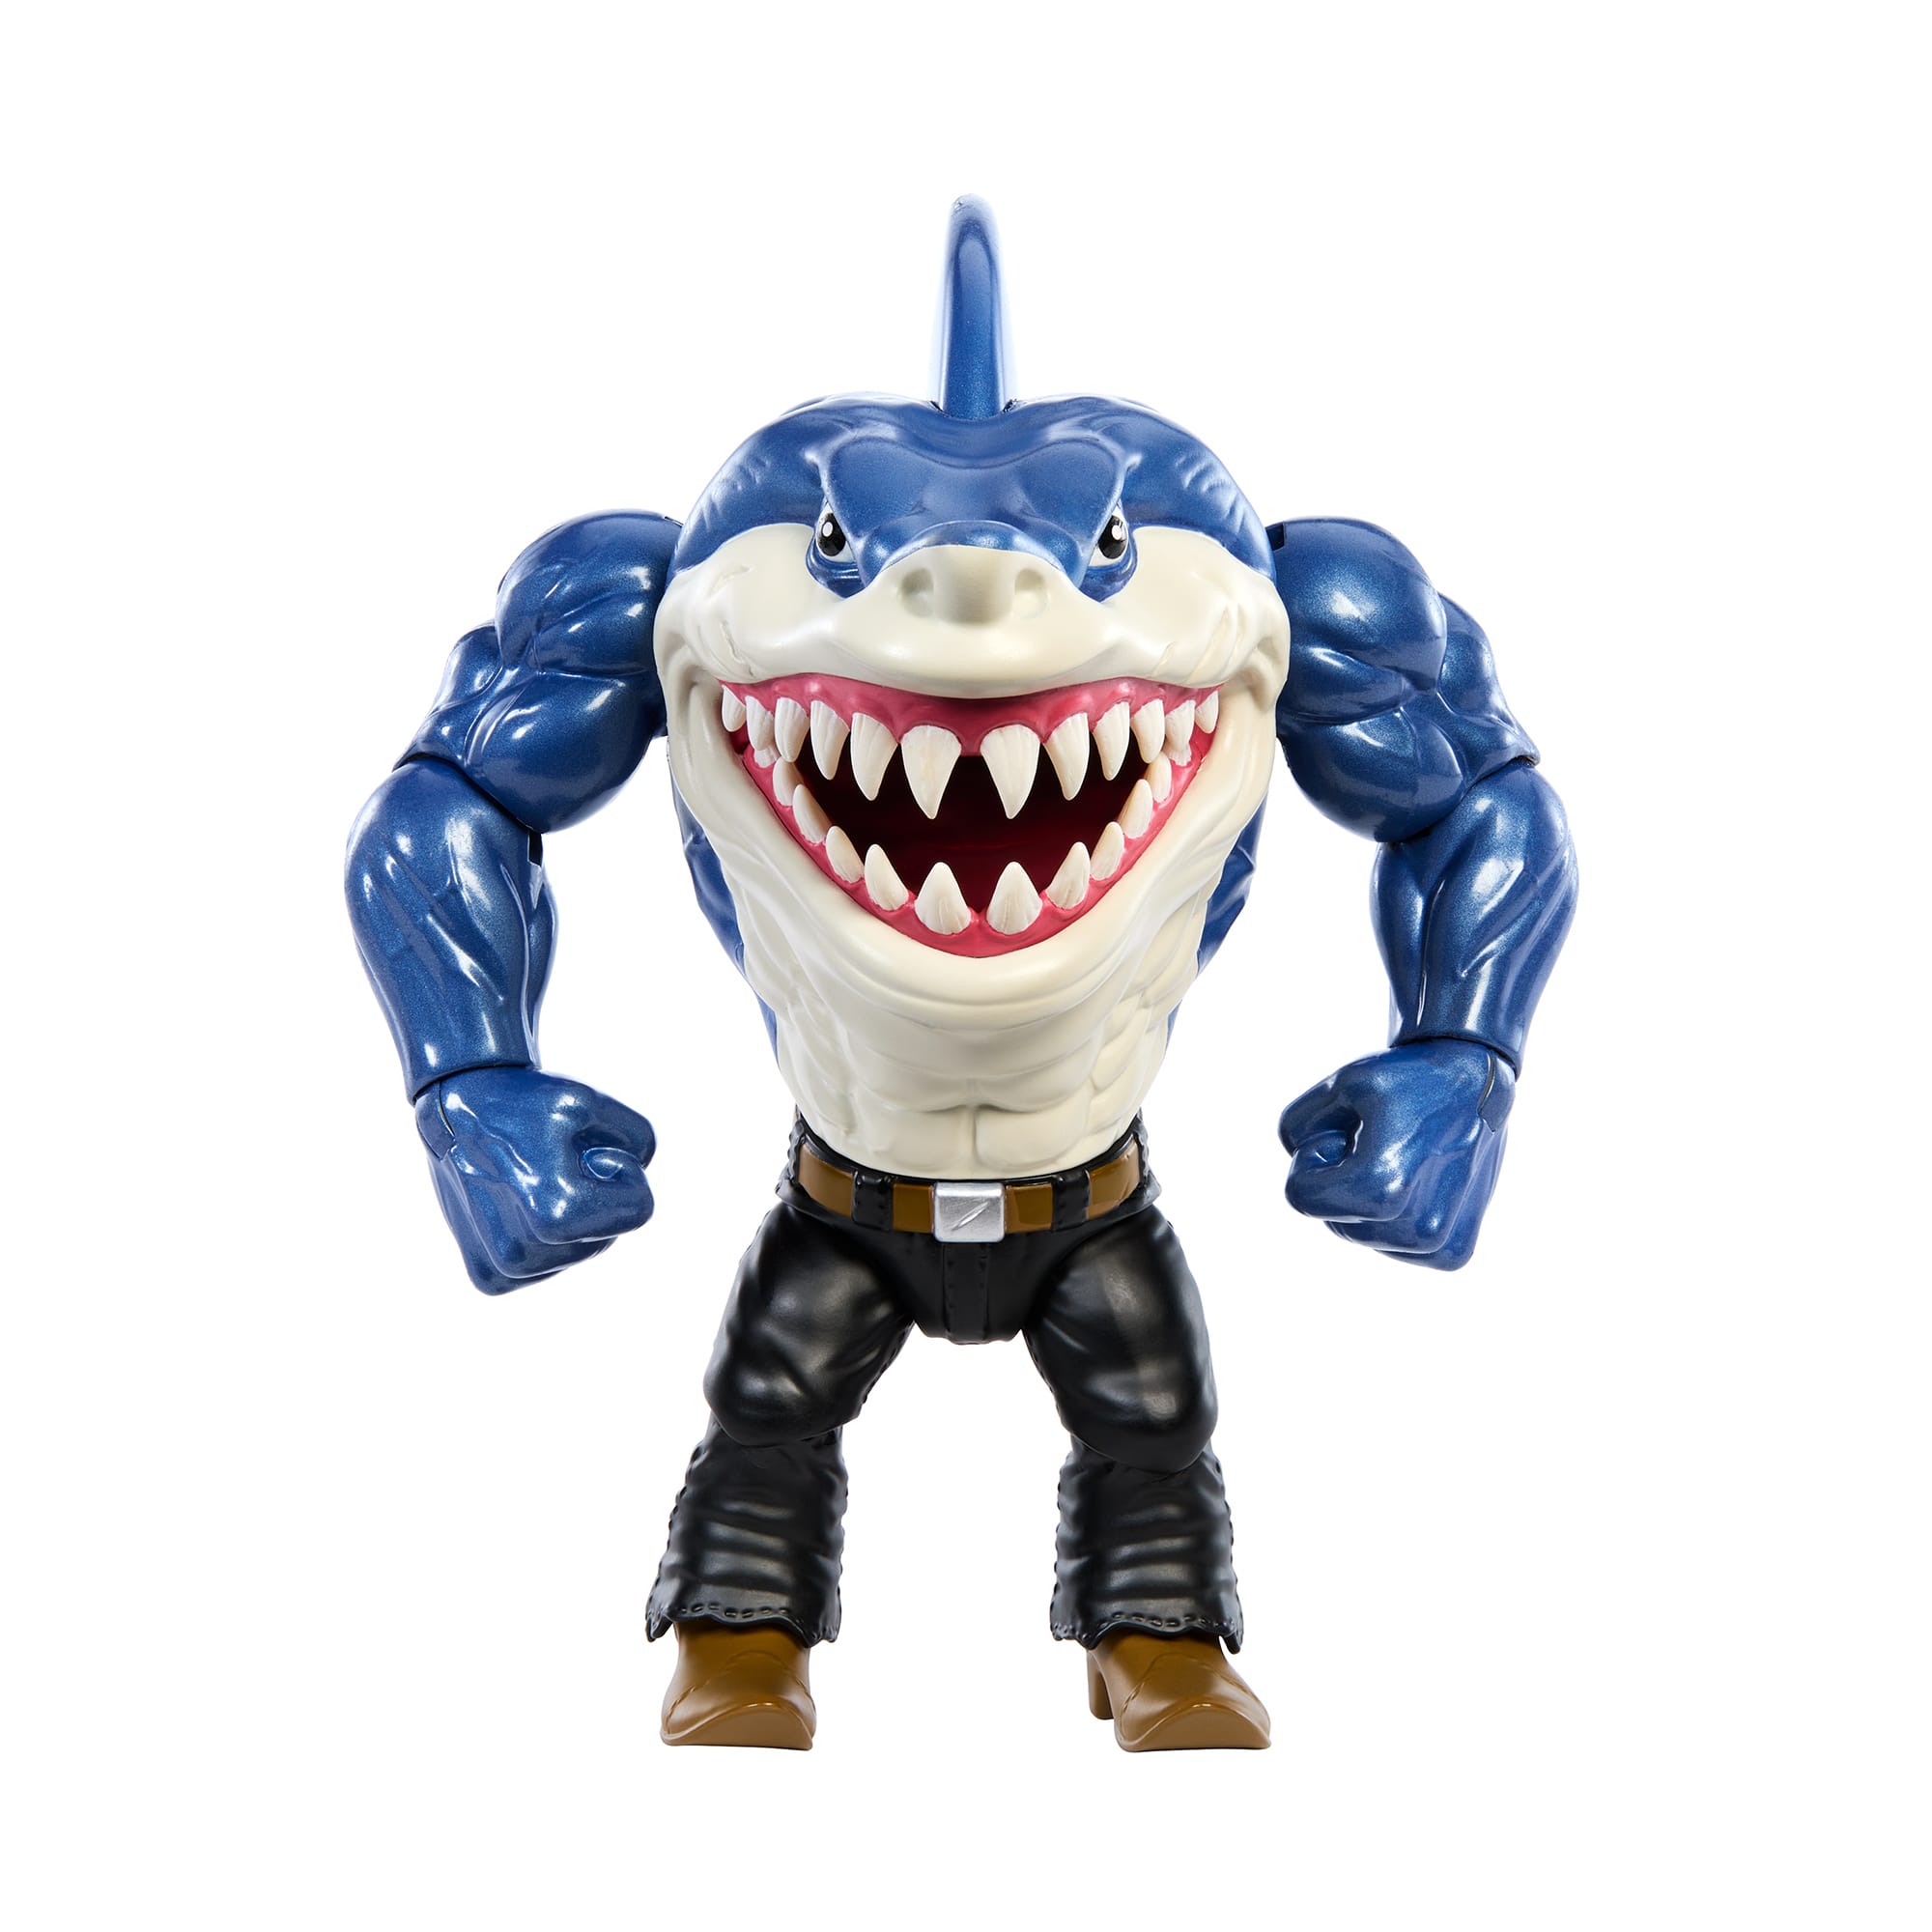 Street Sharks 30th Anniversary Ripster Action Figure